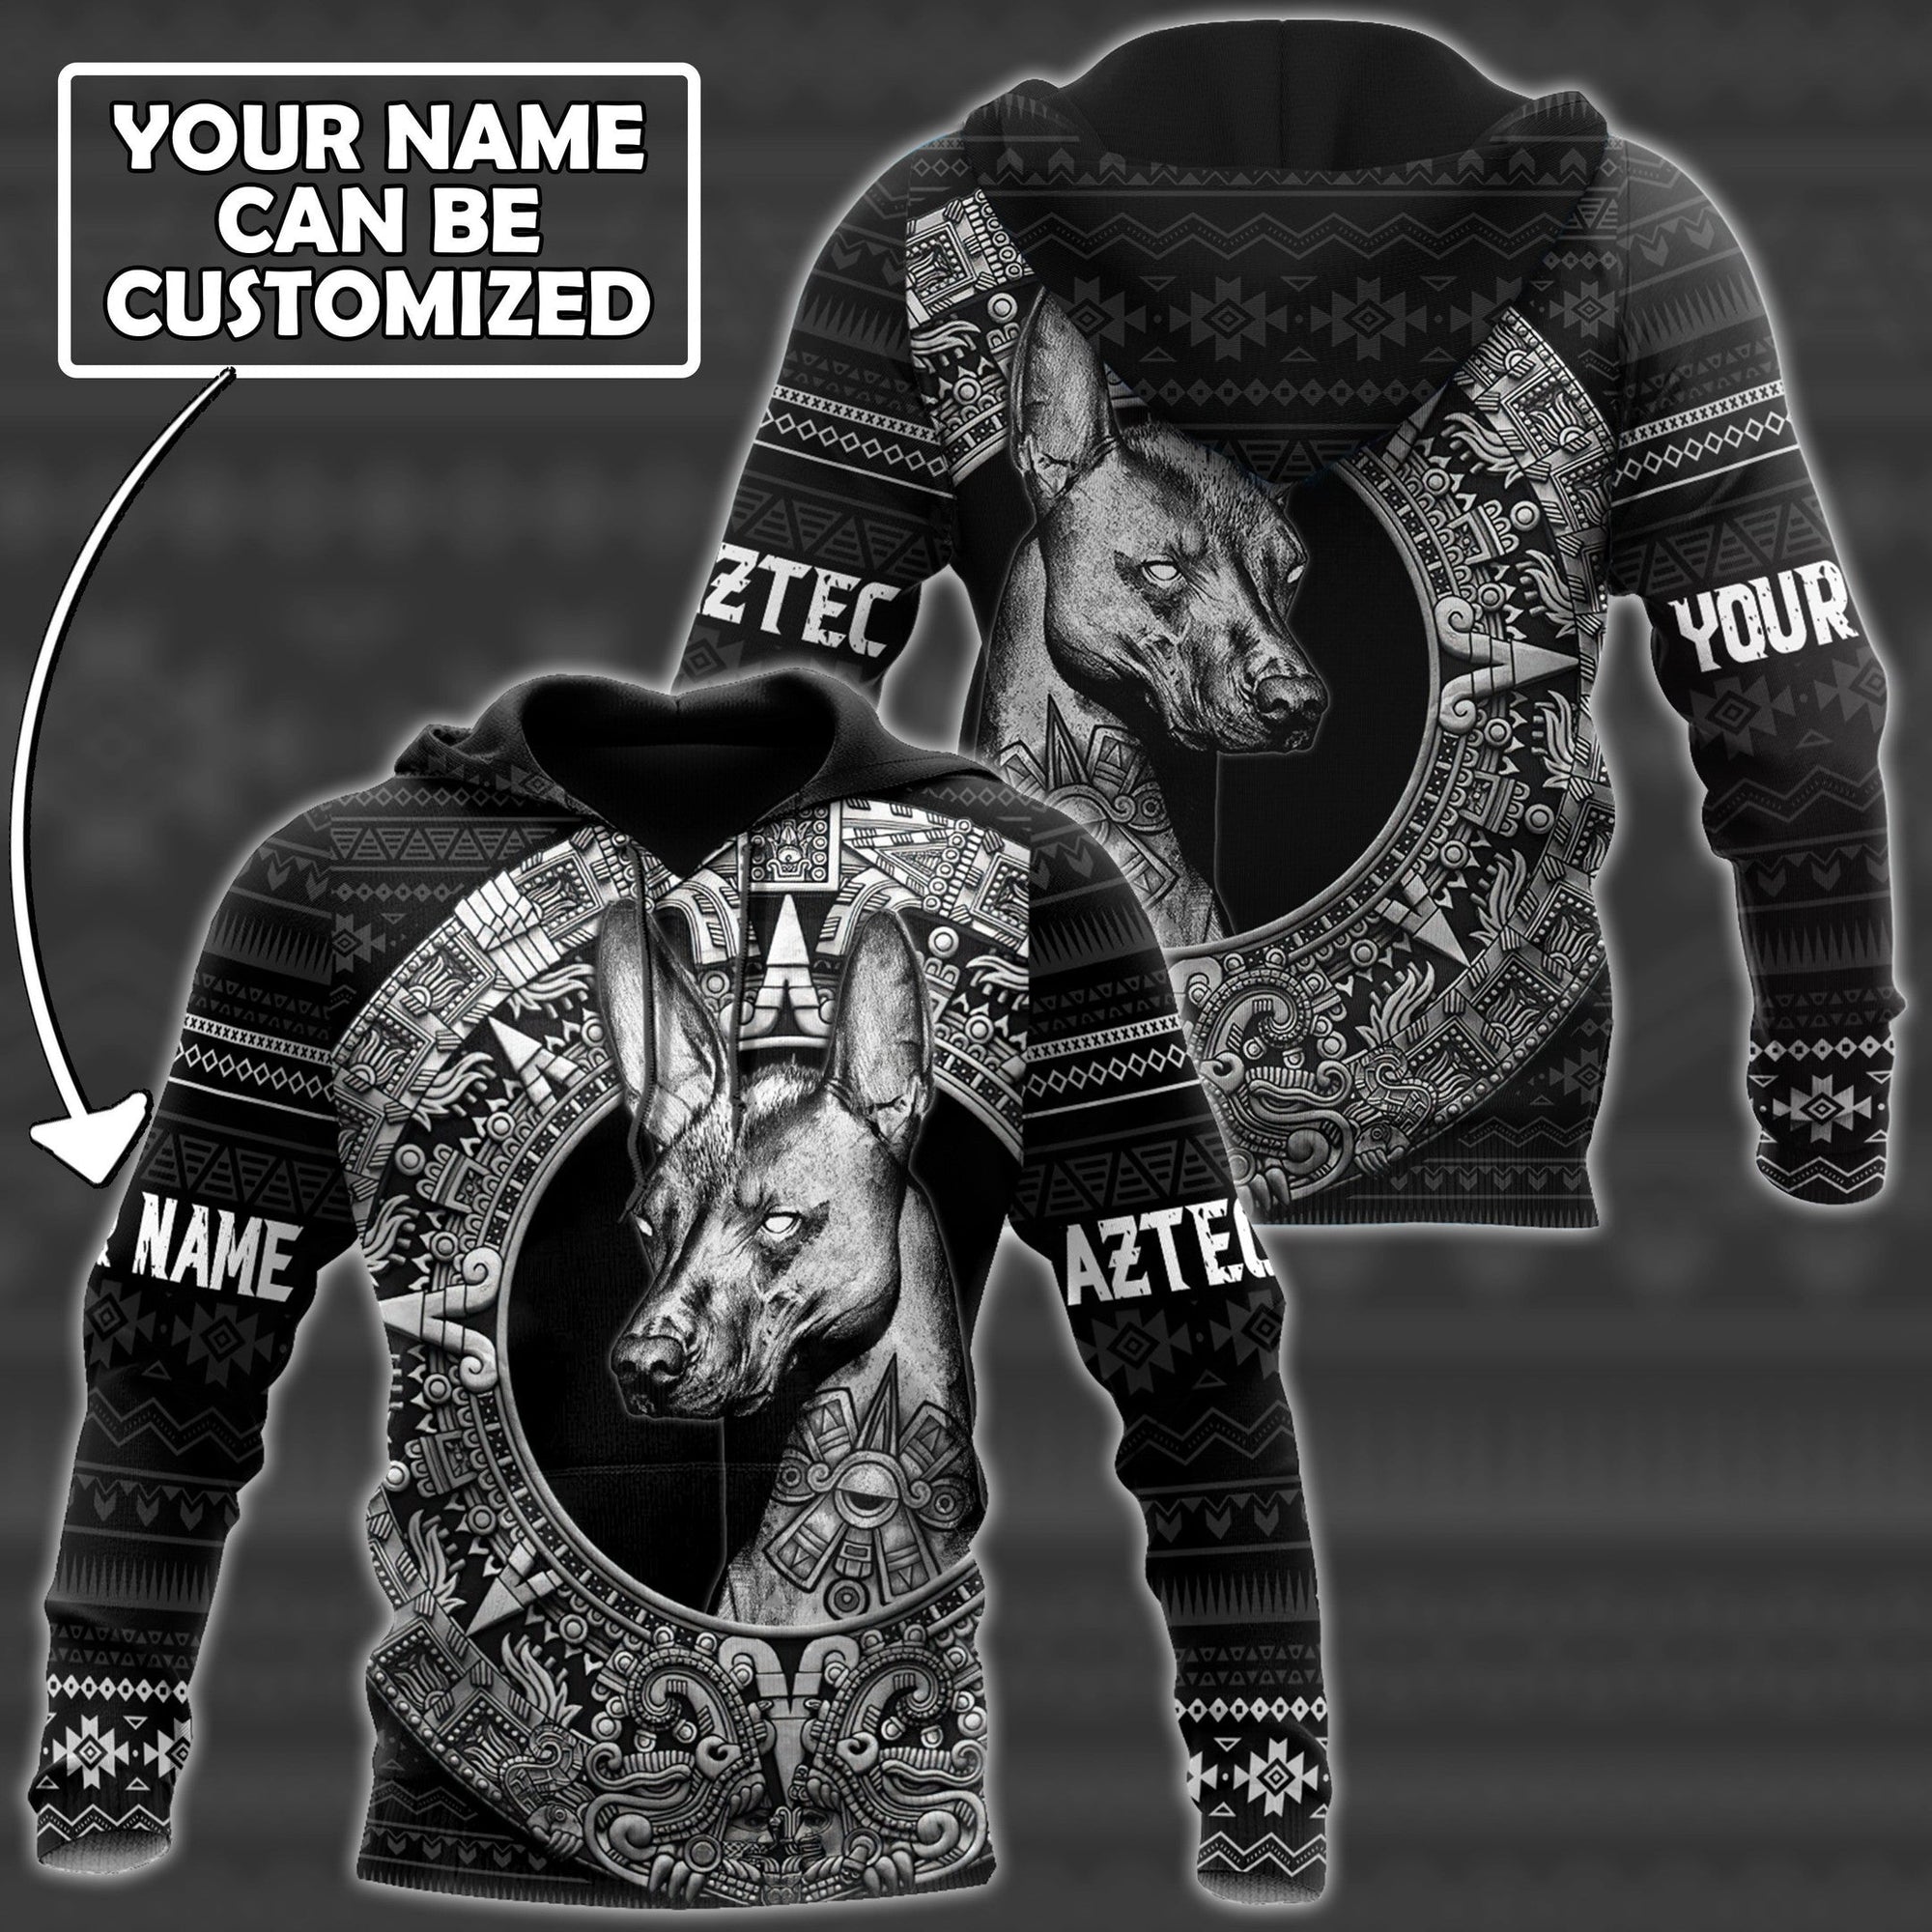 customize-mexico-aztec-sun-stone-pattern-all-over-printed-unisex-hoodie